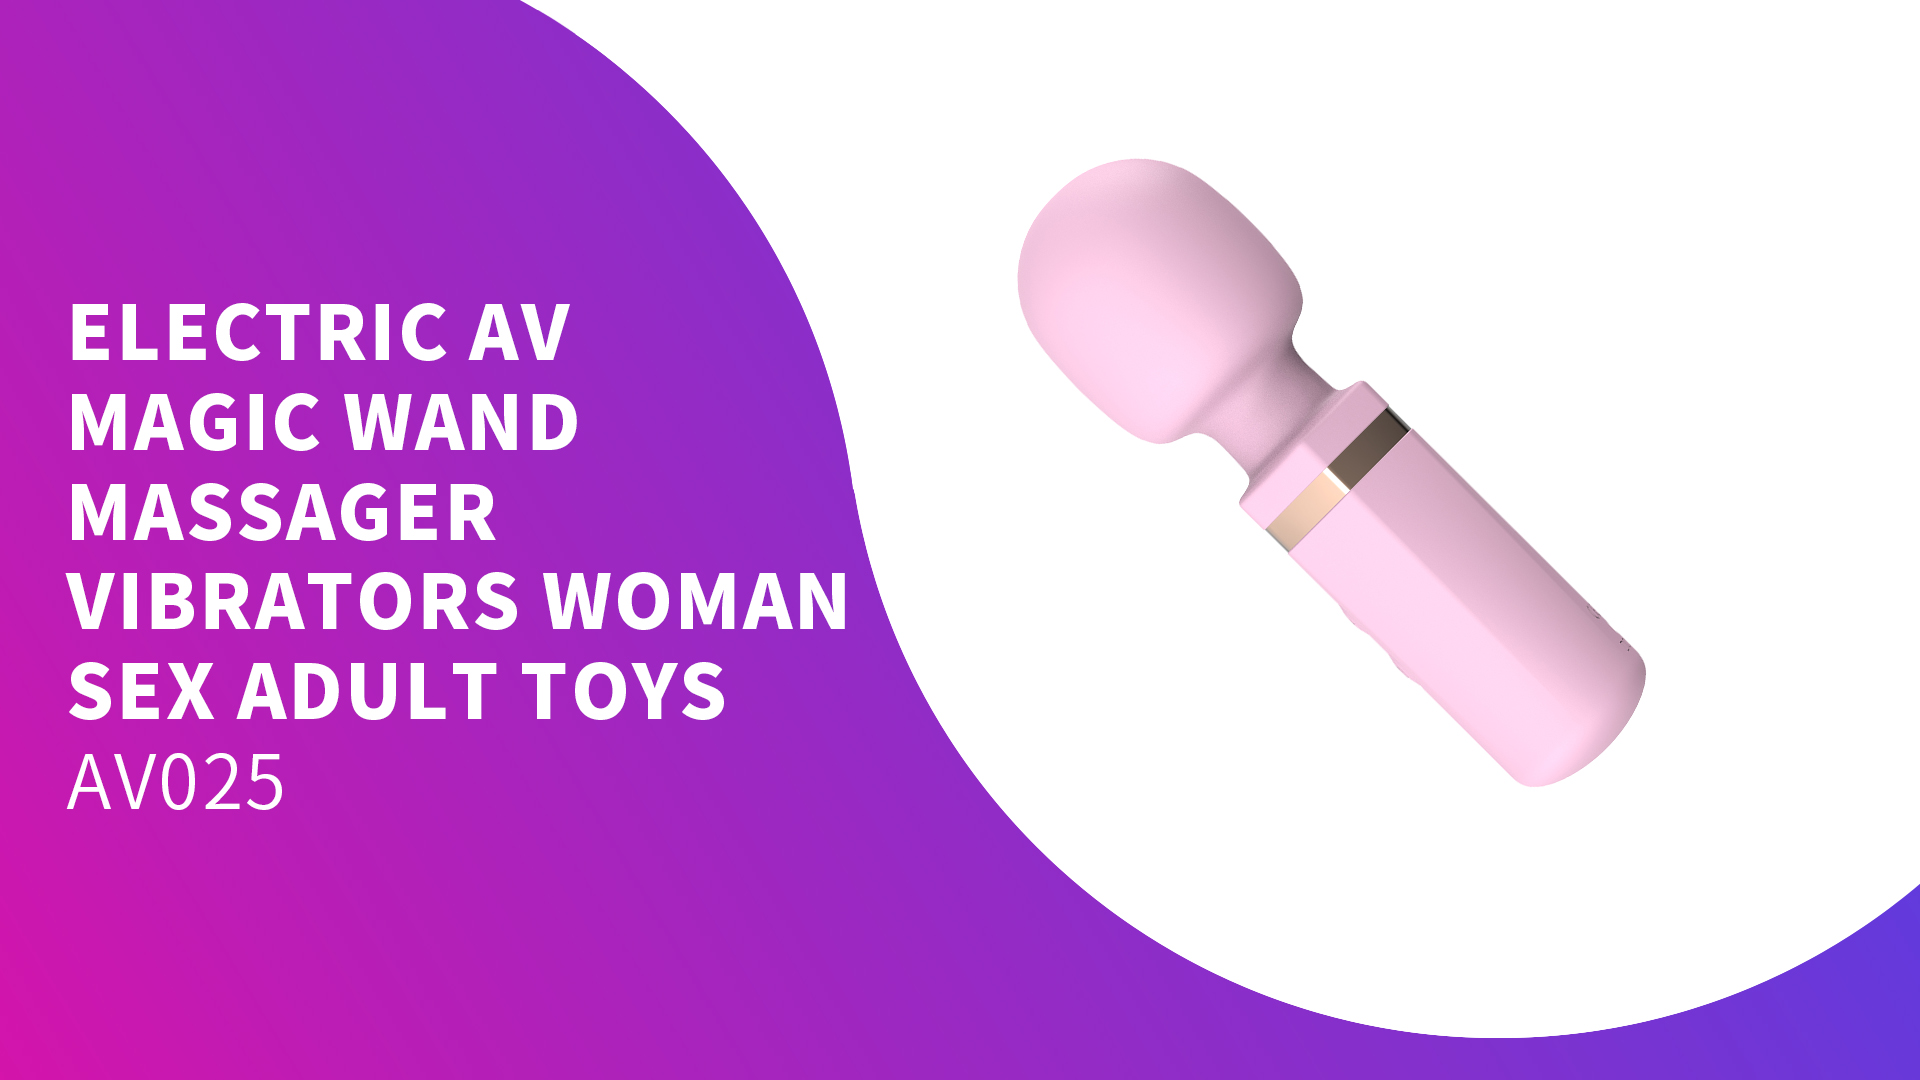 Private Label Brand New Cordless Rechargeable Electric Av Magic Wand Massager Vibrators Woman Sex Adult Toys With Packaging AV025